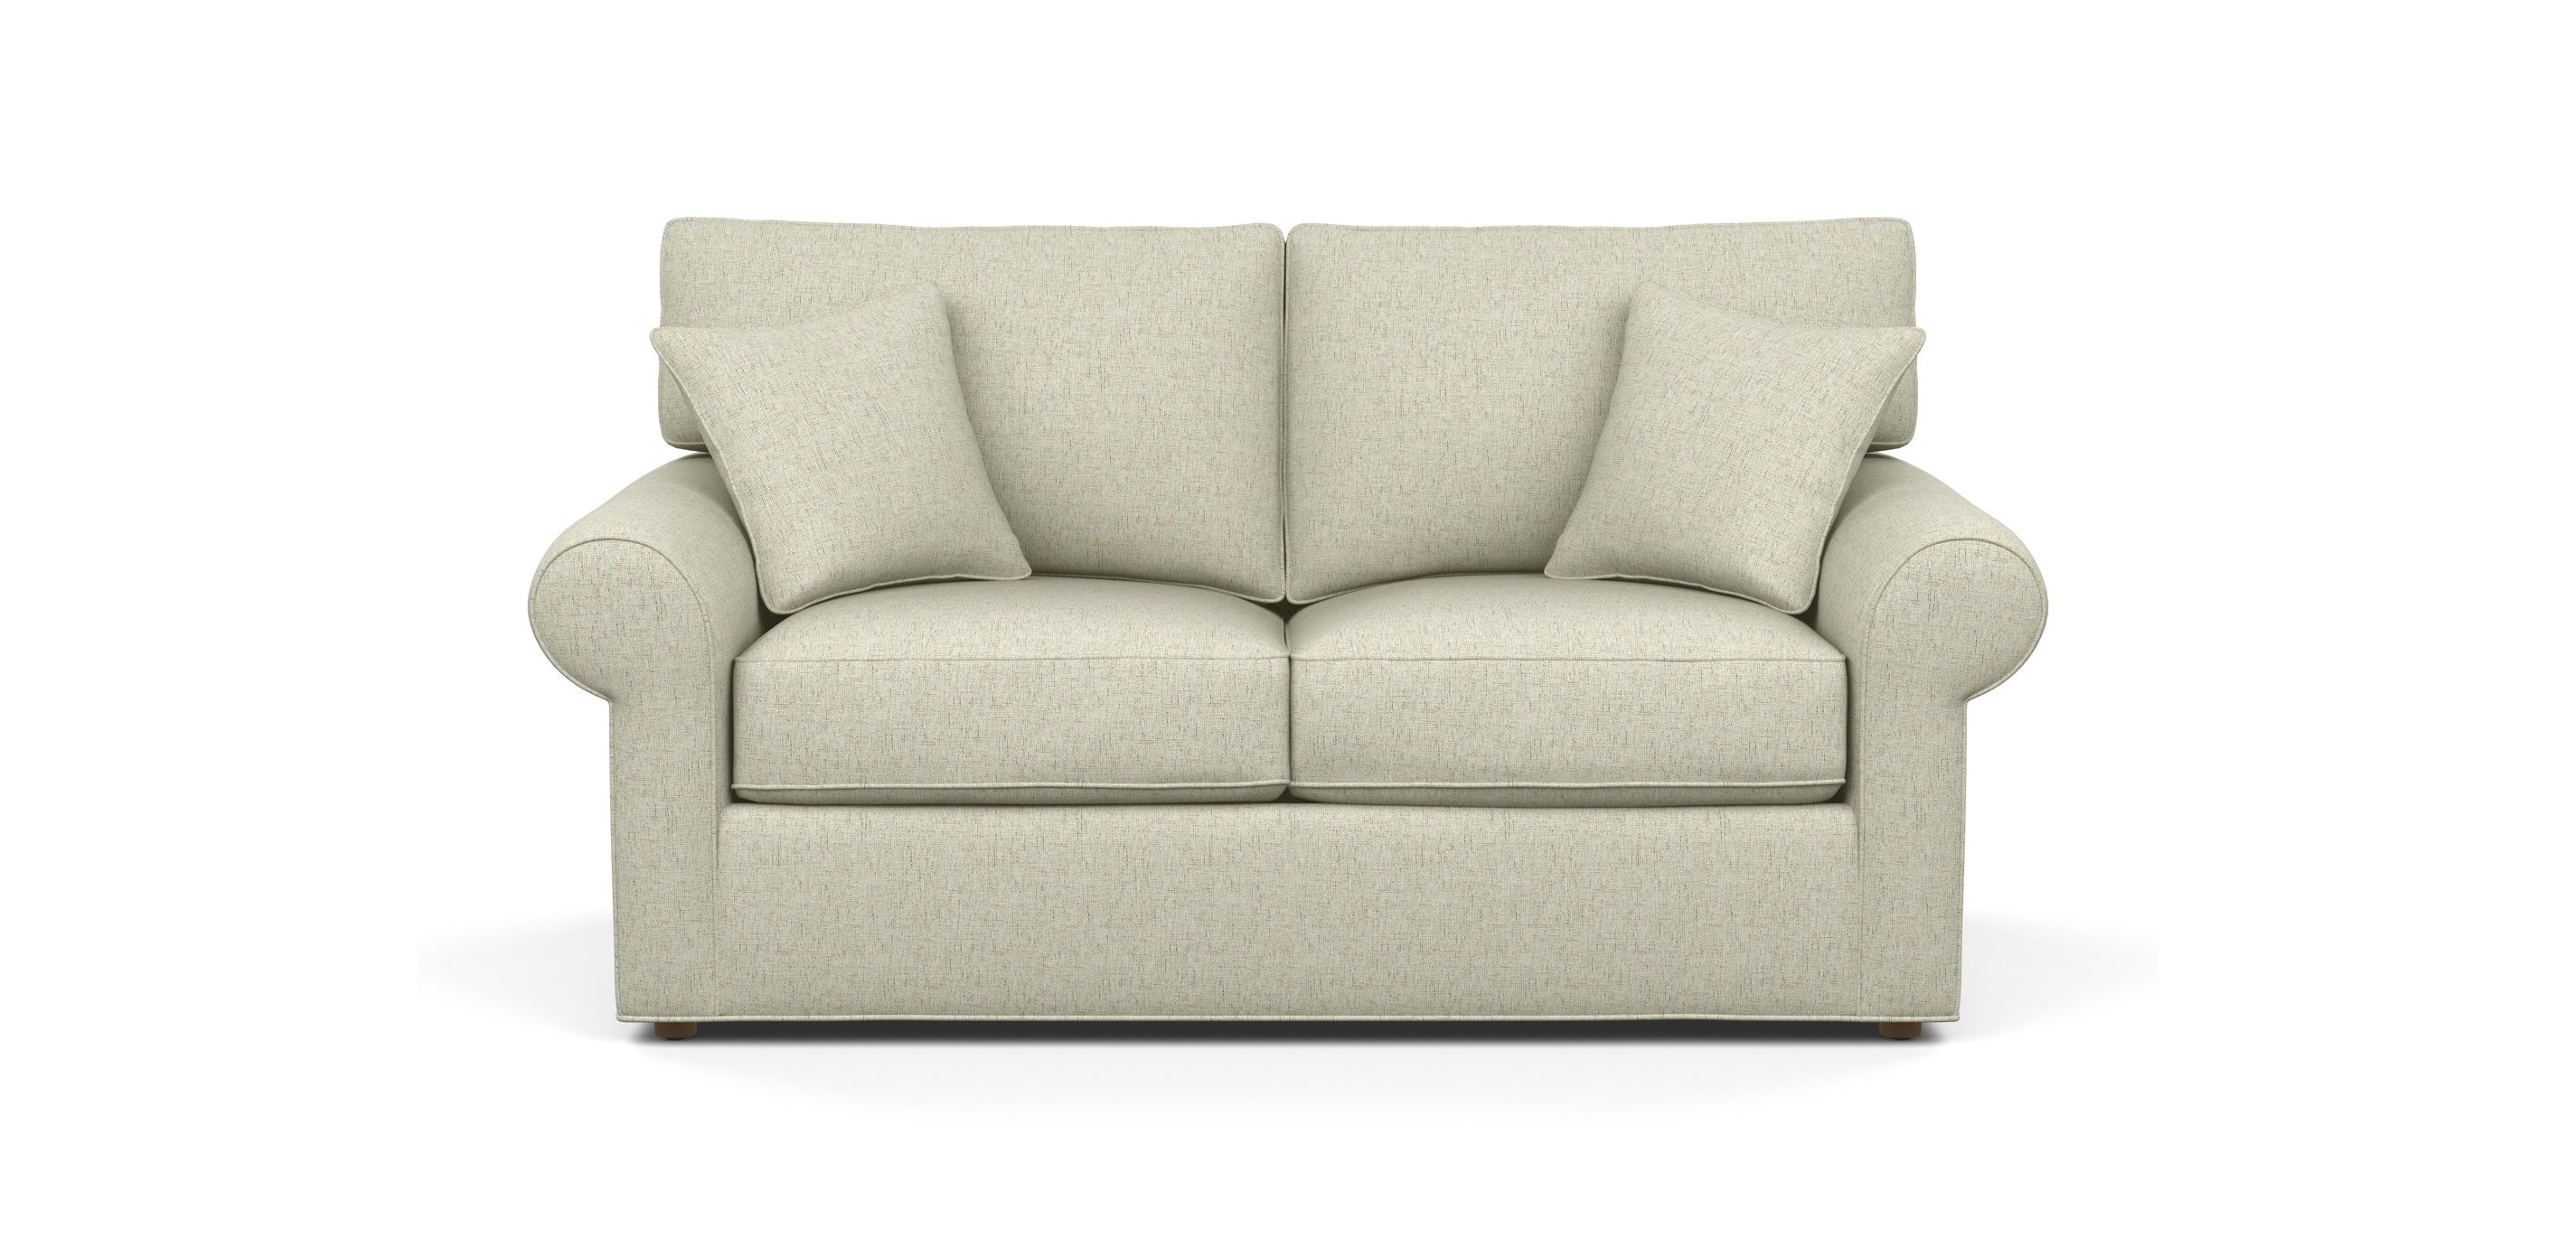 Retreat Roll Arm Sofa | Sofas & Loveseats | Ethan Allen With Regard To Sofas With Rolled Arm (View 8 of 20)